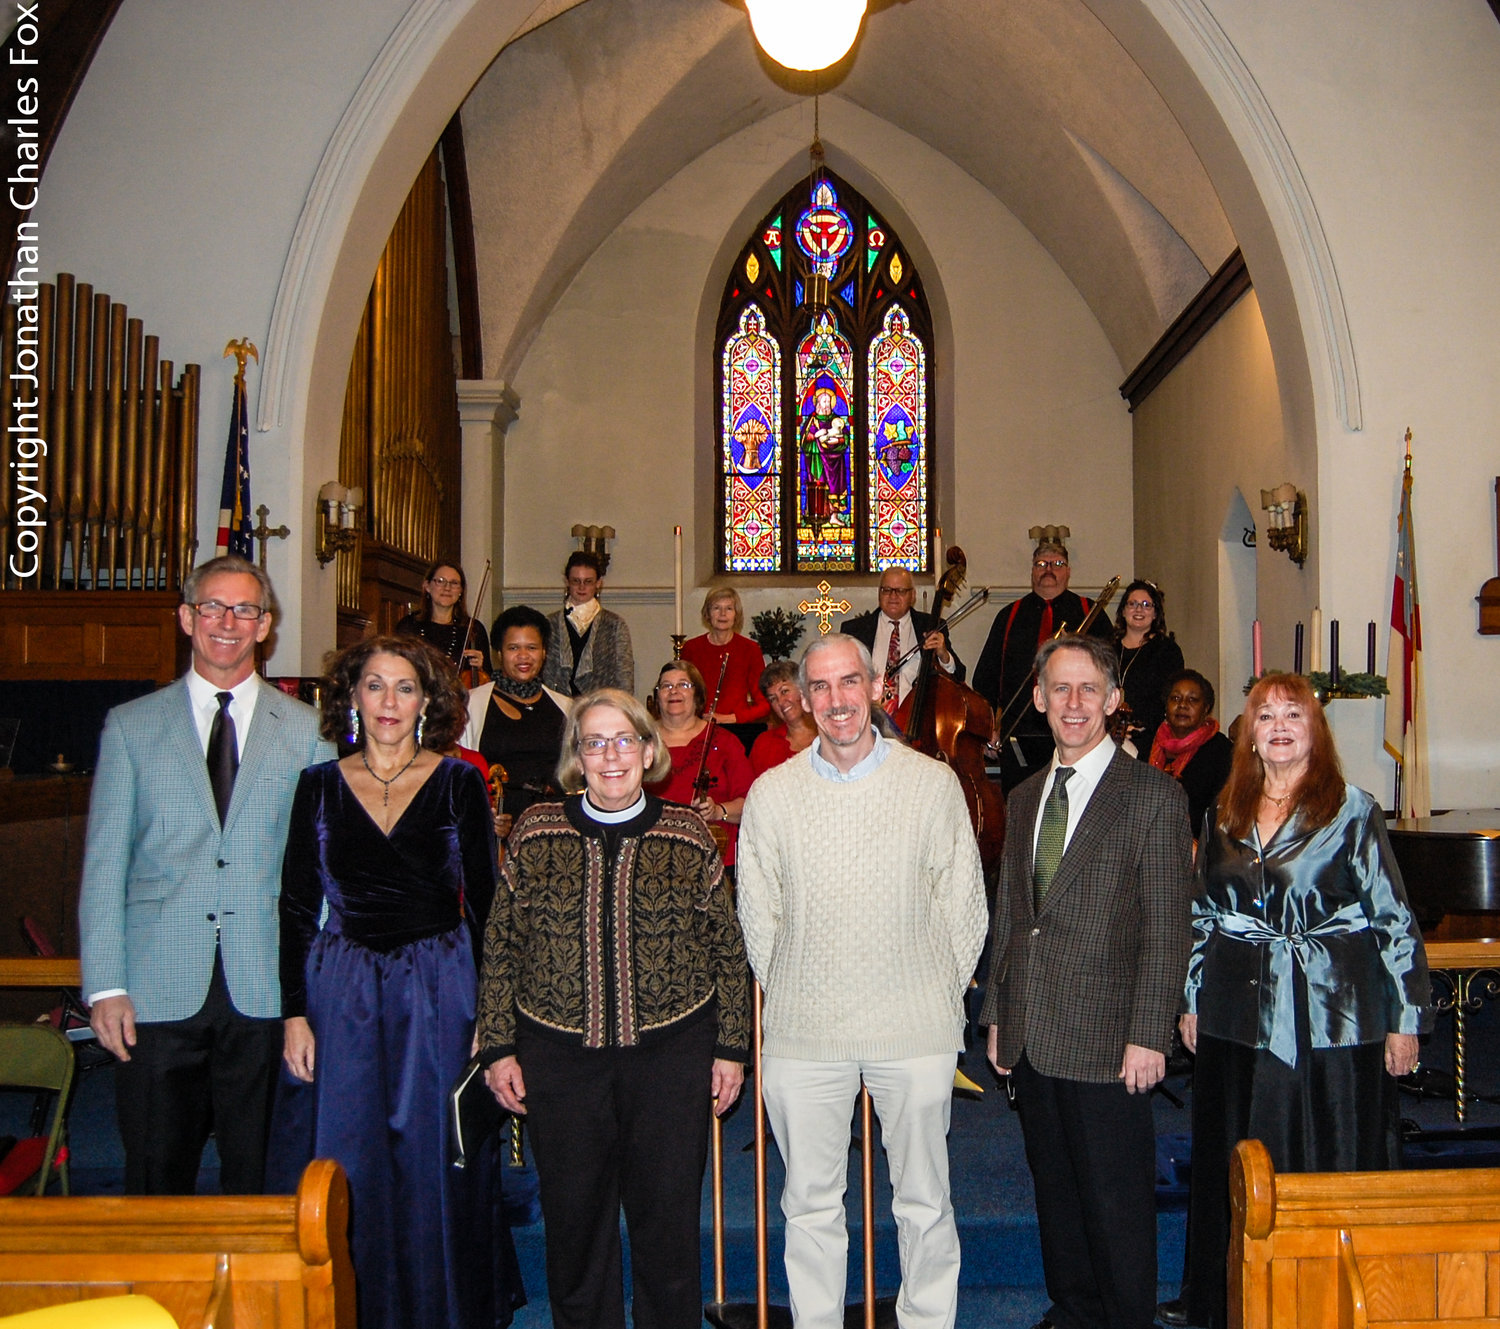 St. John’s Rev. Diana S. Scheide with WJFF’s Dan Rigney, center, are seen here flanked by soloists John Weidemann, Janice Meyerson, left, and Kevin Hanek and Kathy Geary, right, with the musicians who accompanied the Handel’s “Messiah” sing-along behind them.